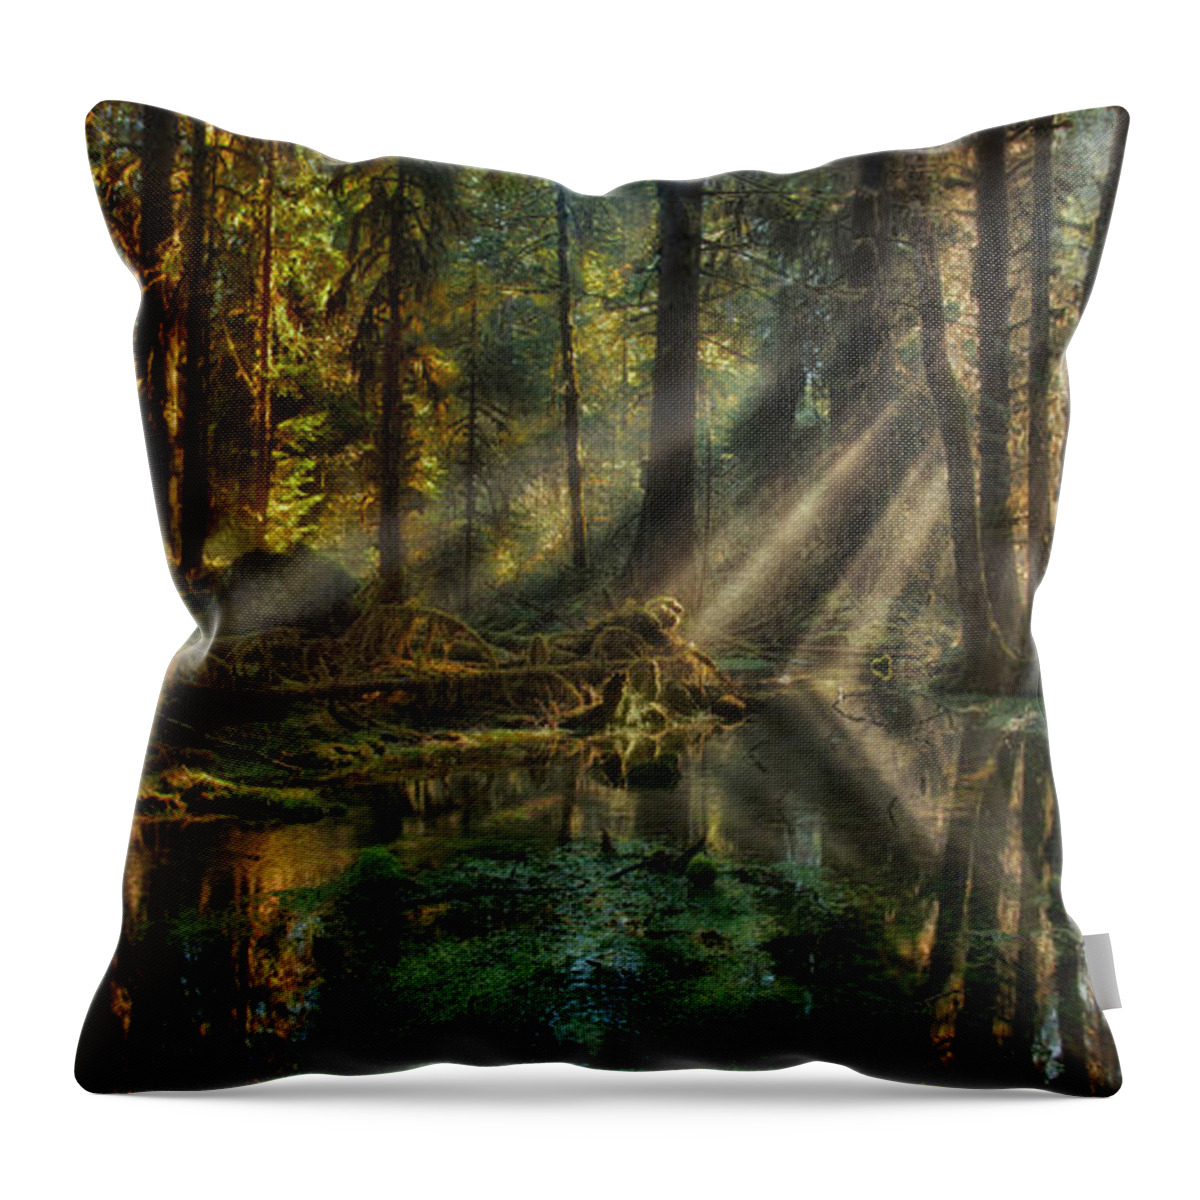 Rain Forest Throw Pillow featuring the photograph Rain Forest Sunbeams by Mary Jo Allen